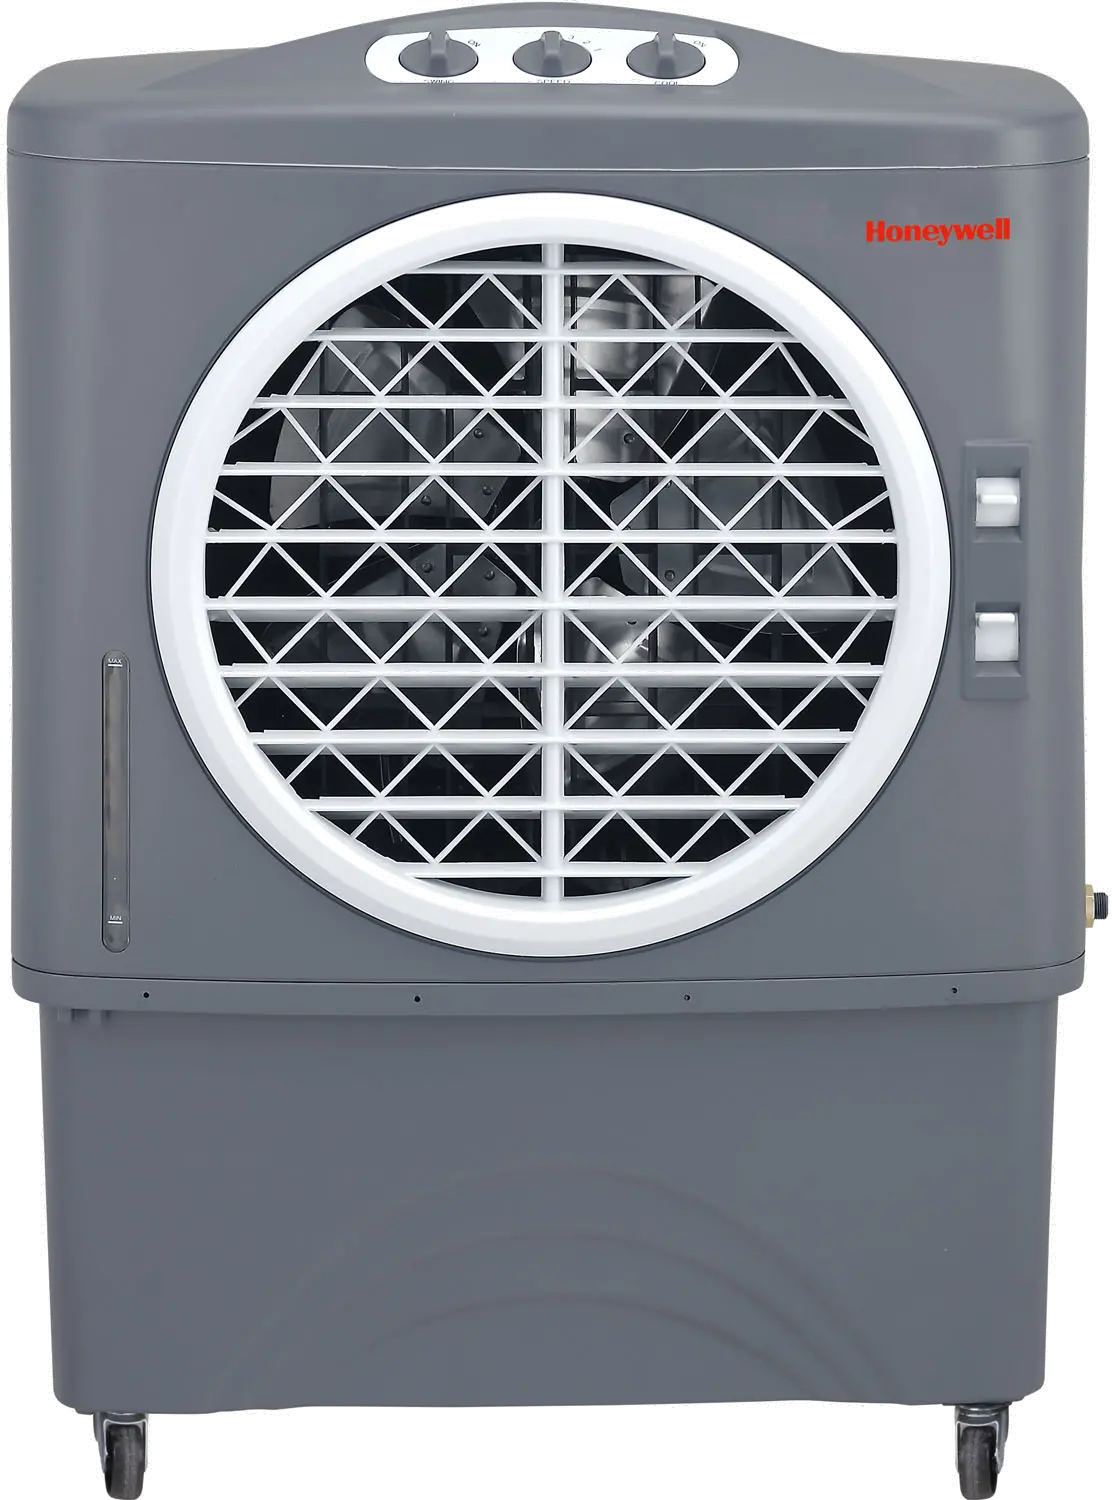 Photos - Air Conditioner Honeywell Hanover Outdoor Indoor Outdoor Evaporative Air Cooler with Mechanical Cont 